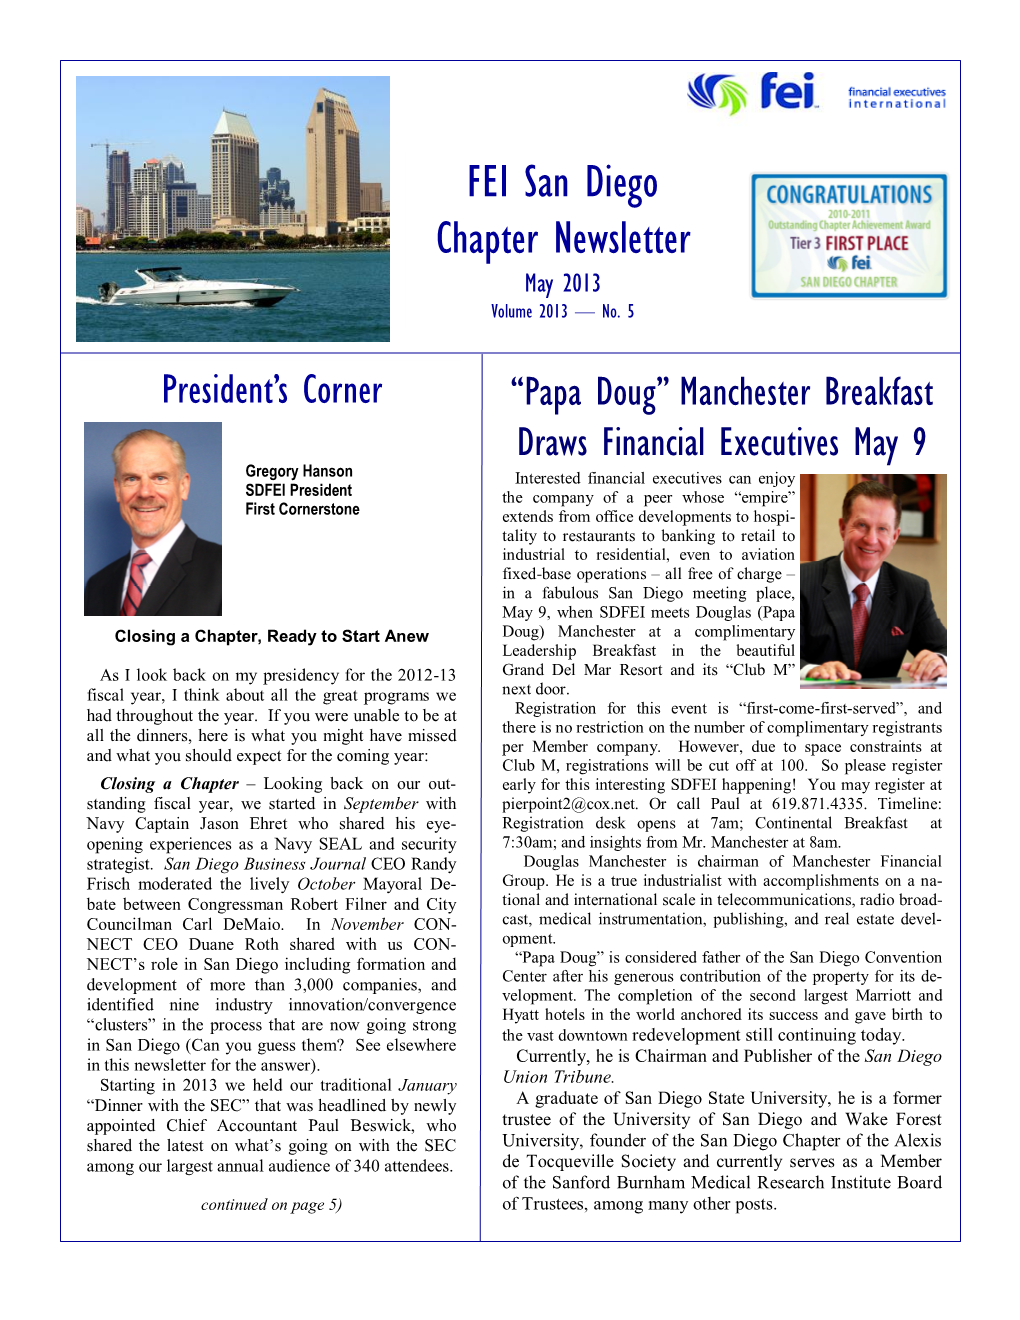 San Diego Chapter FEI Newsletter May 2013